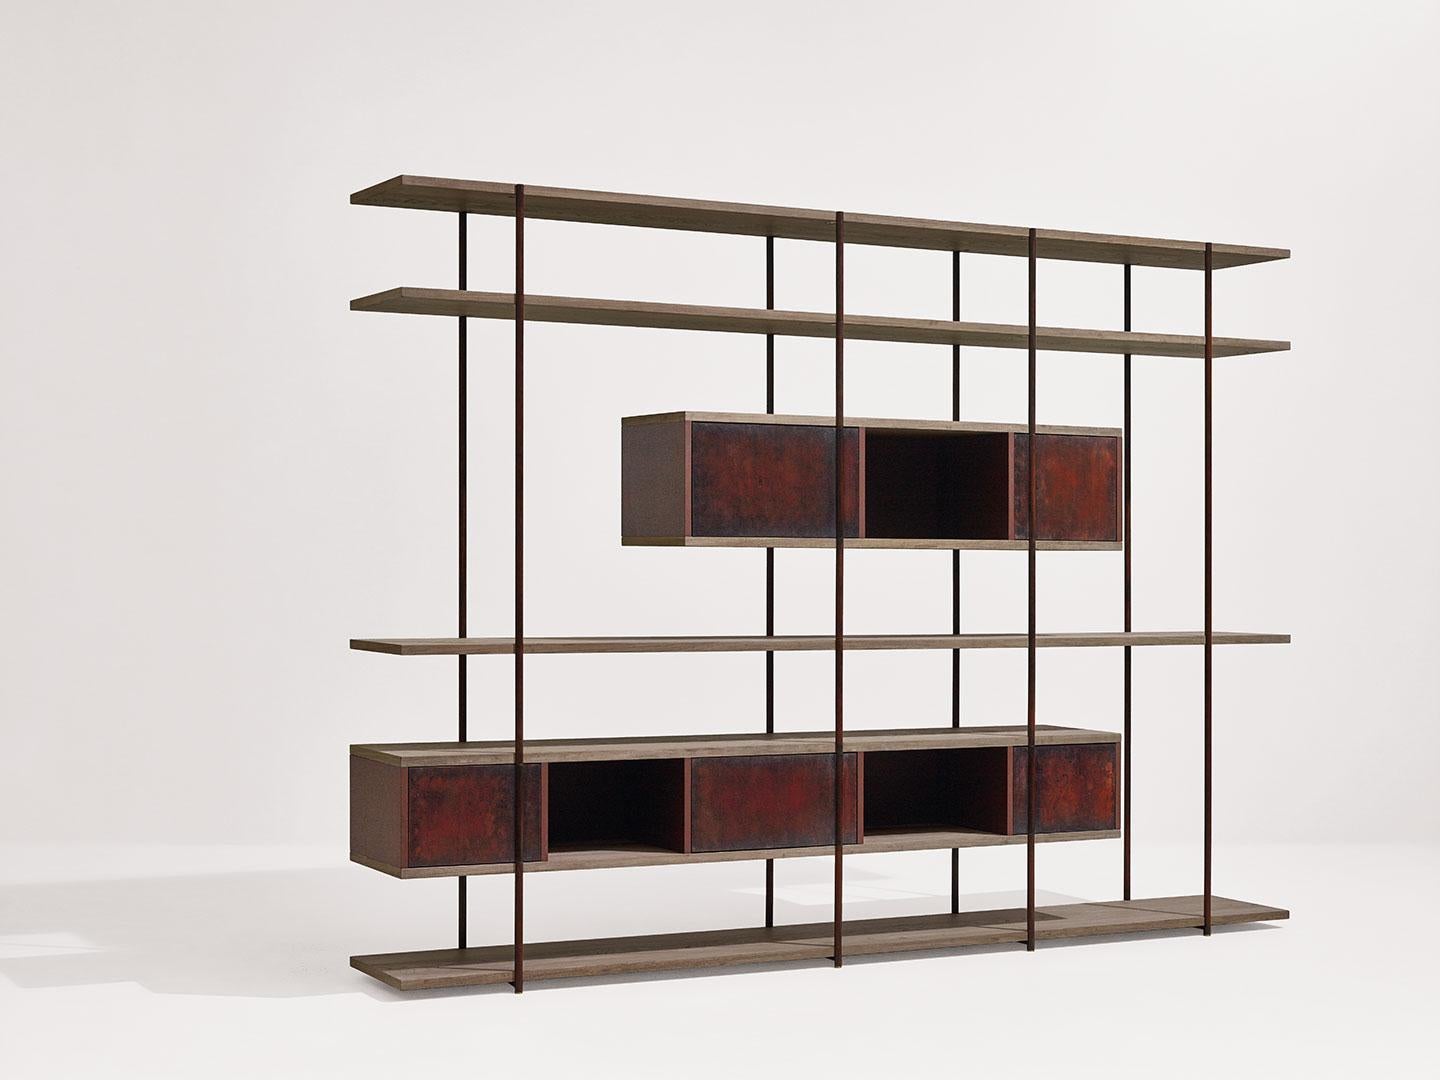 Pivot bookshelf by SEM.
Dimensions: W 278 x D 38 x H 203 cm.
Material: metallic tubolar structure, pivoting doors in surface in antique brass or patinas, shelves in fossil elm or canaletto walnut, side and back panels in matt
painted MDF.